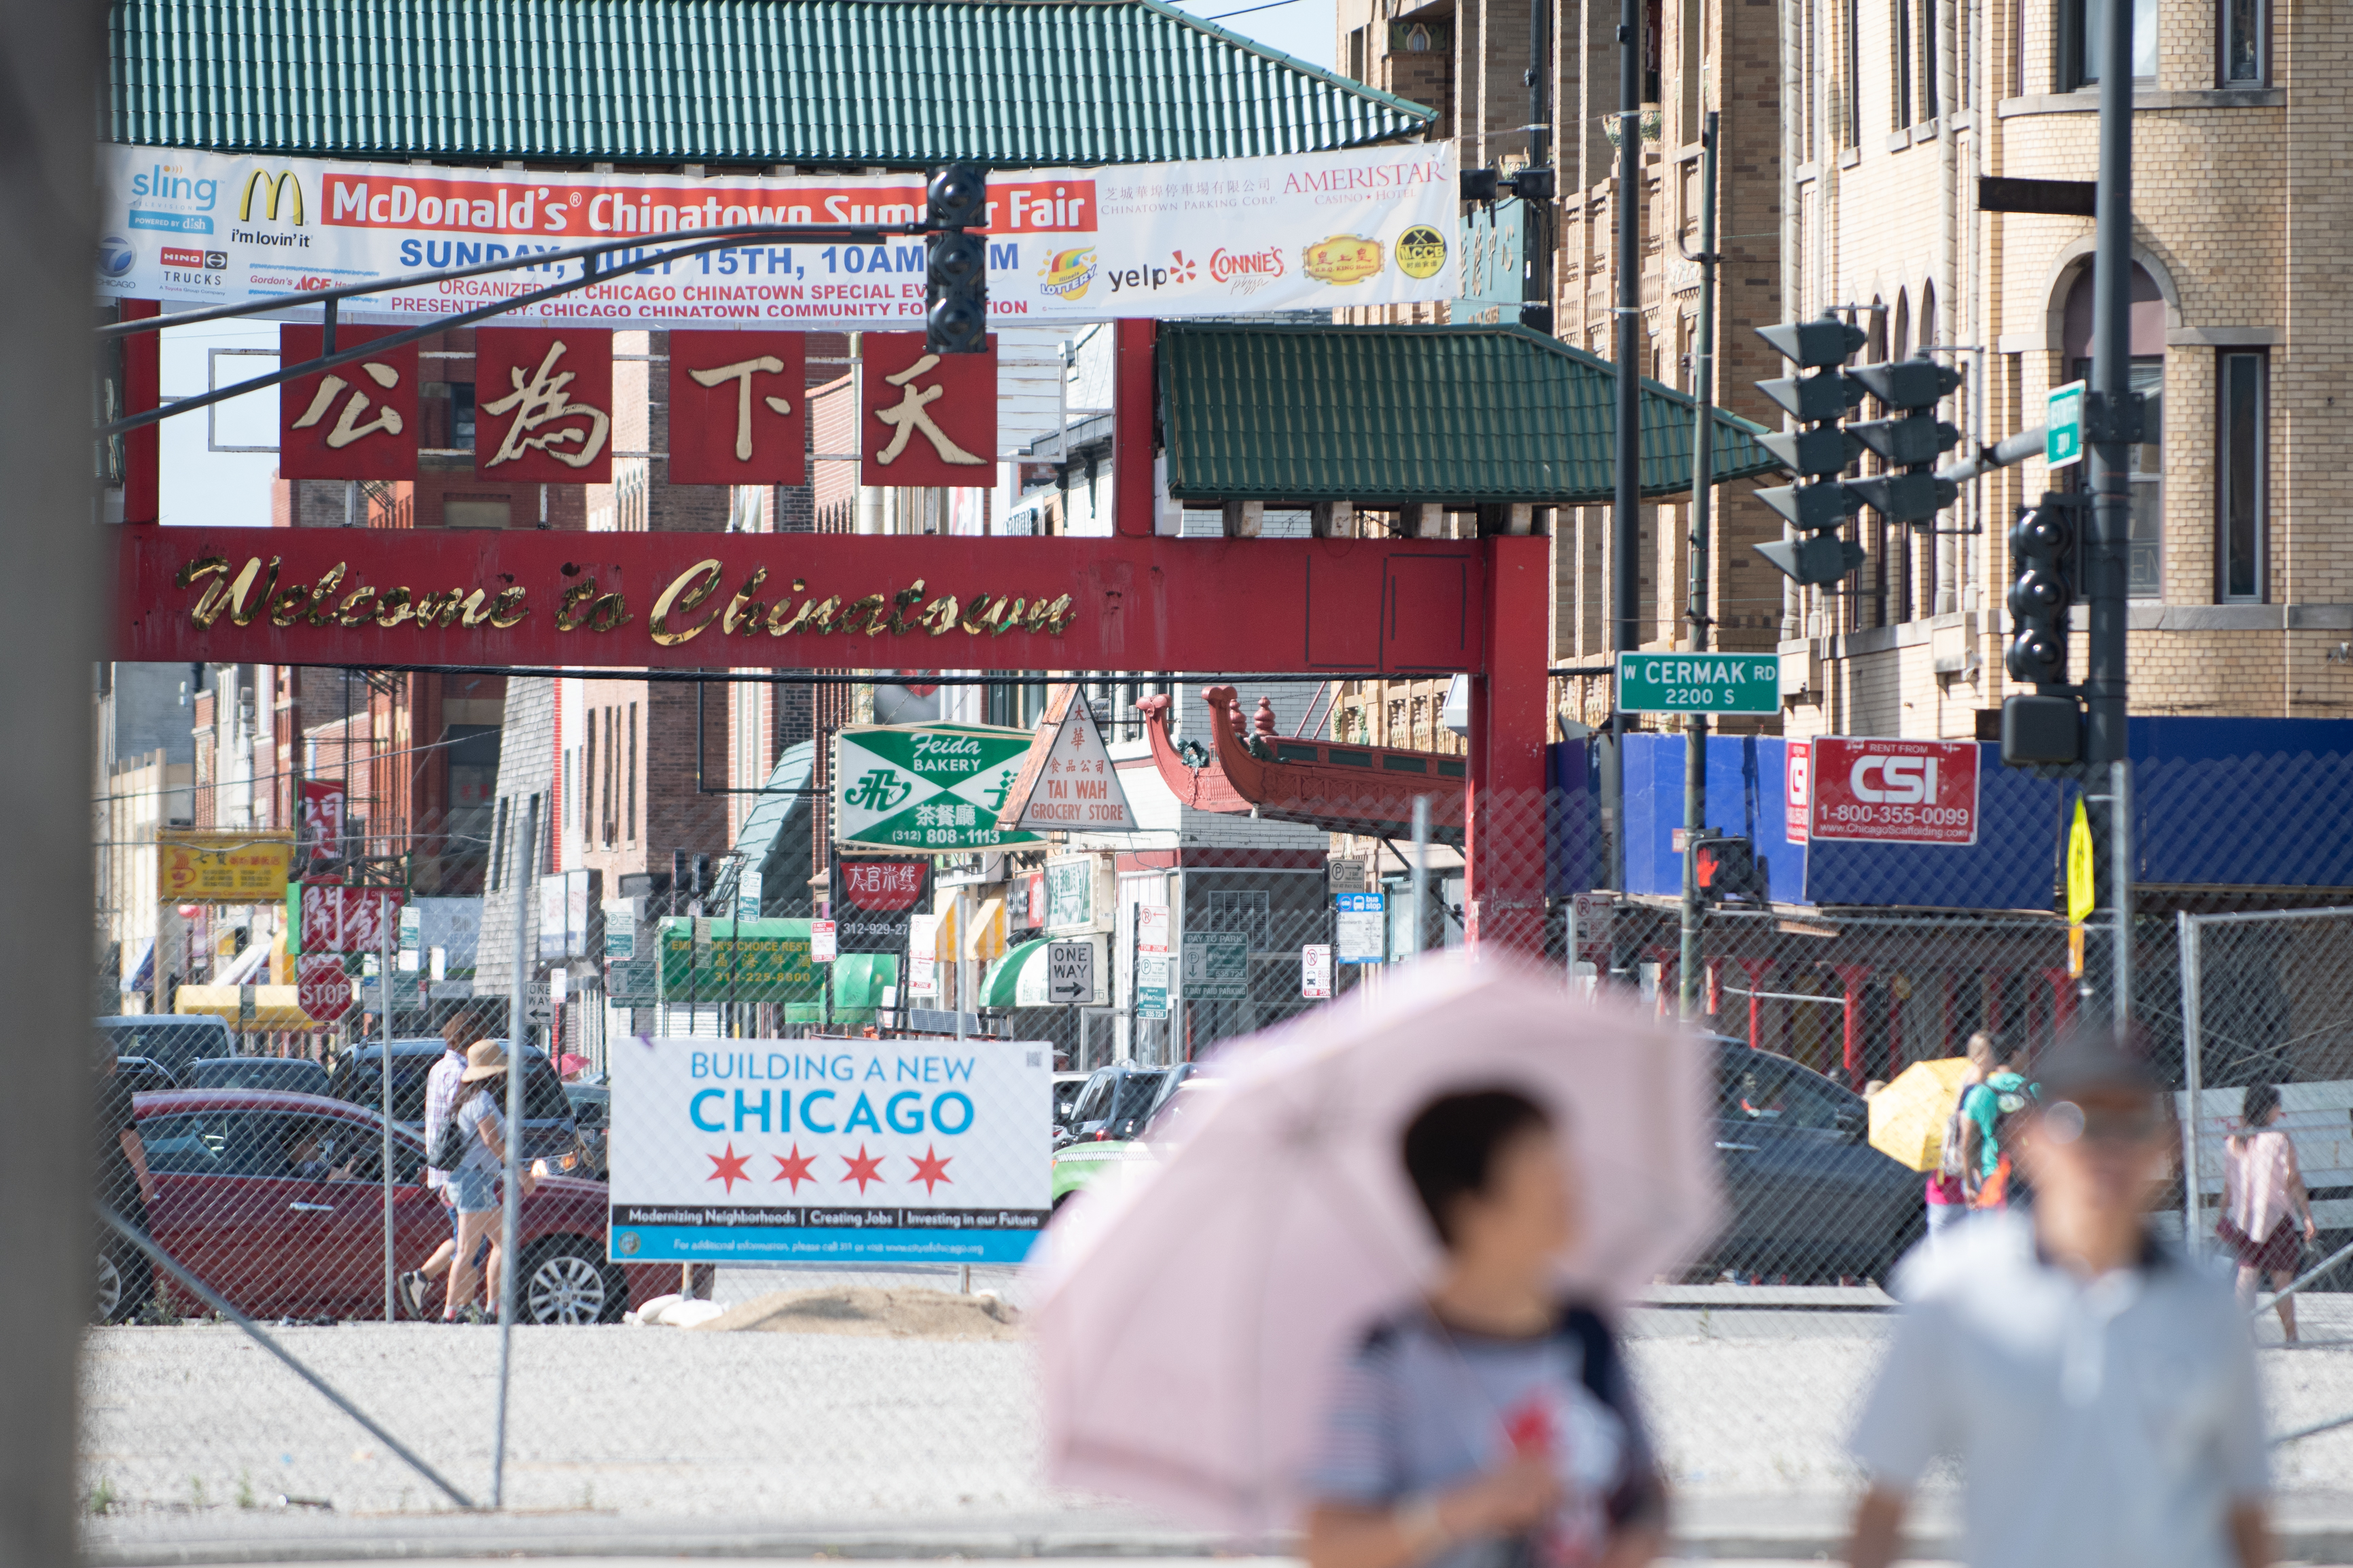 Property values in Chicago’s Chinatown continue to rise at a healthy pace, without excessive gentrification.